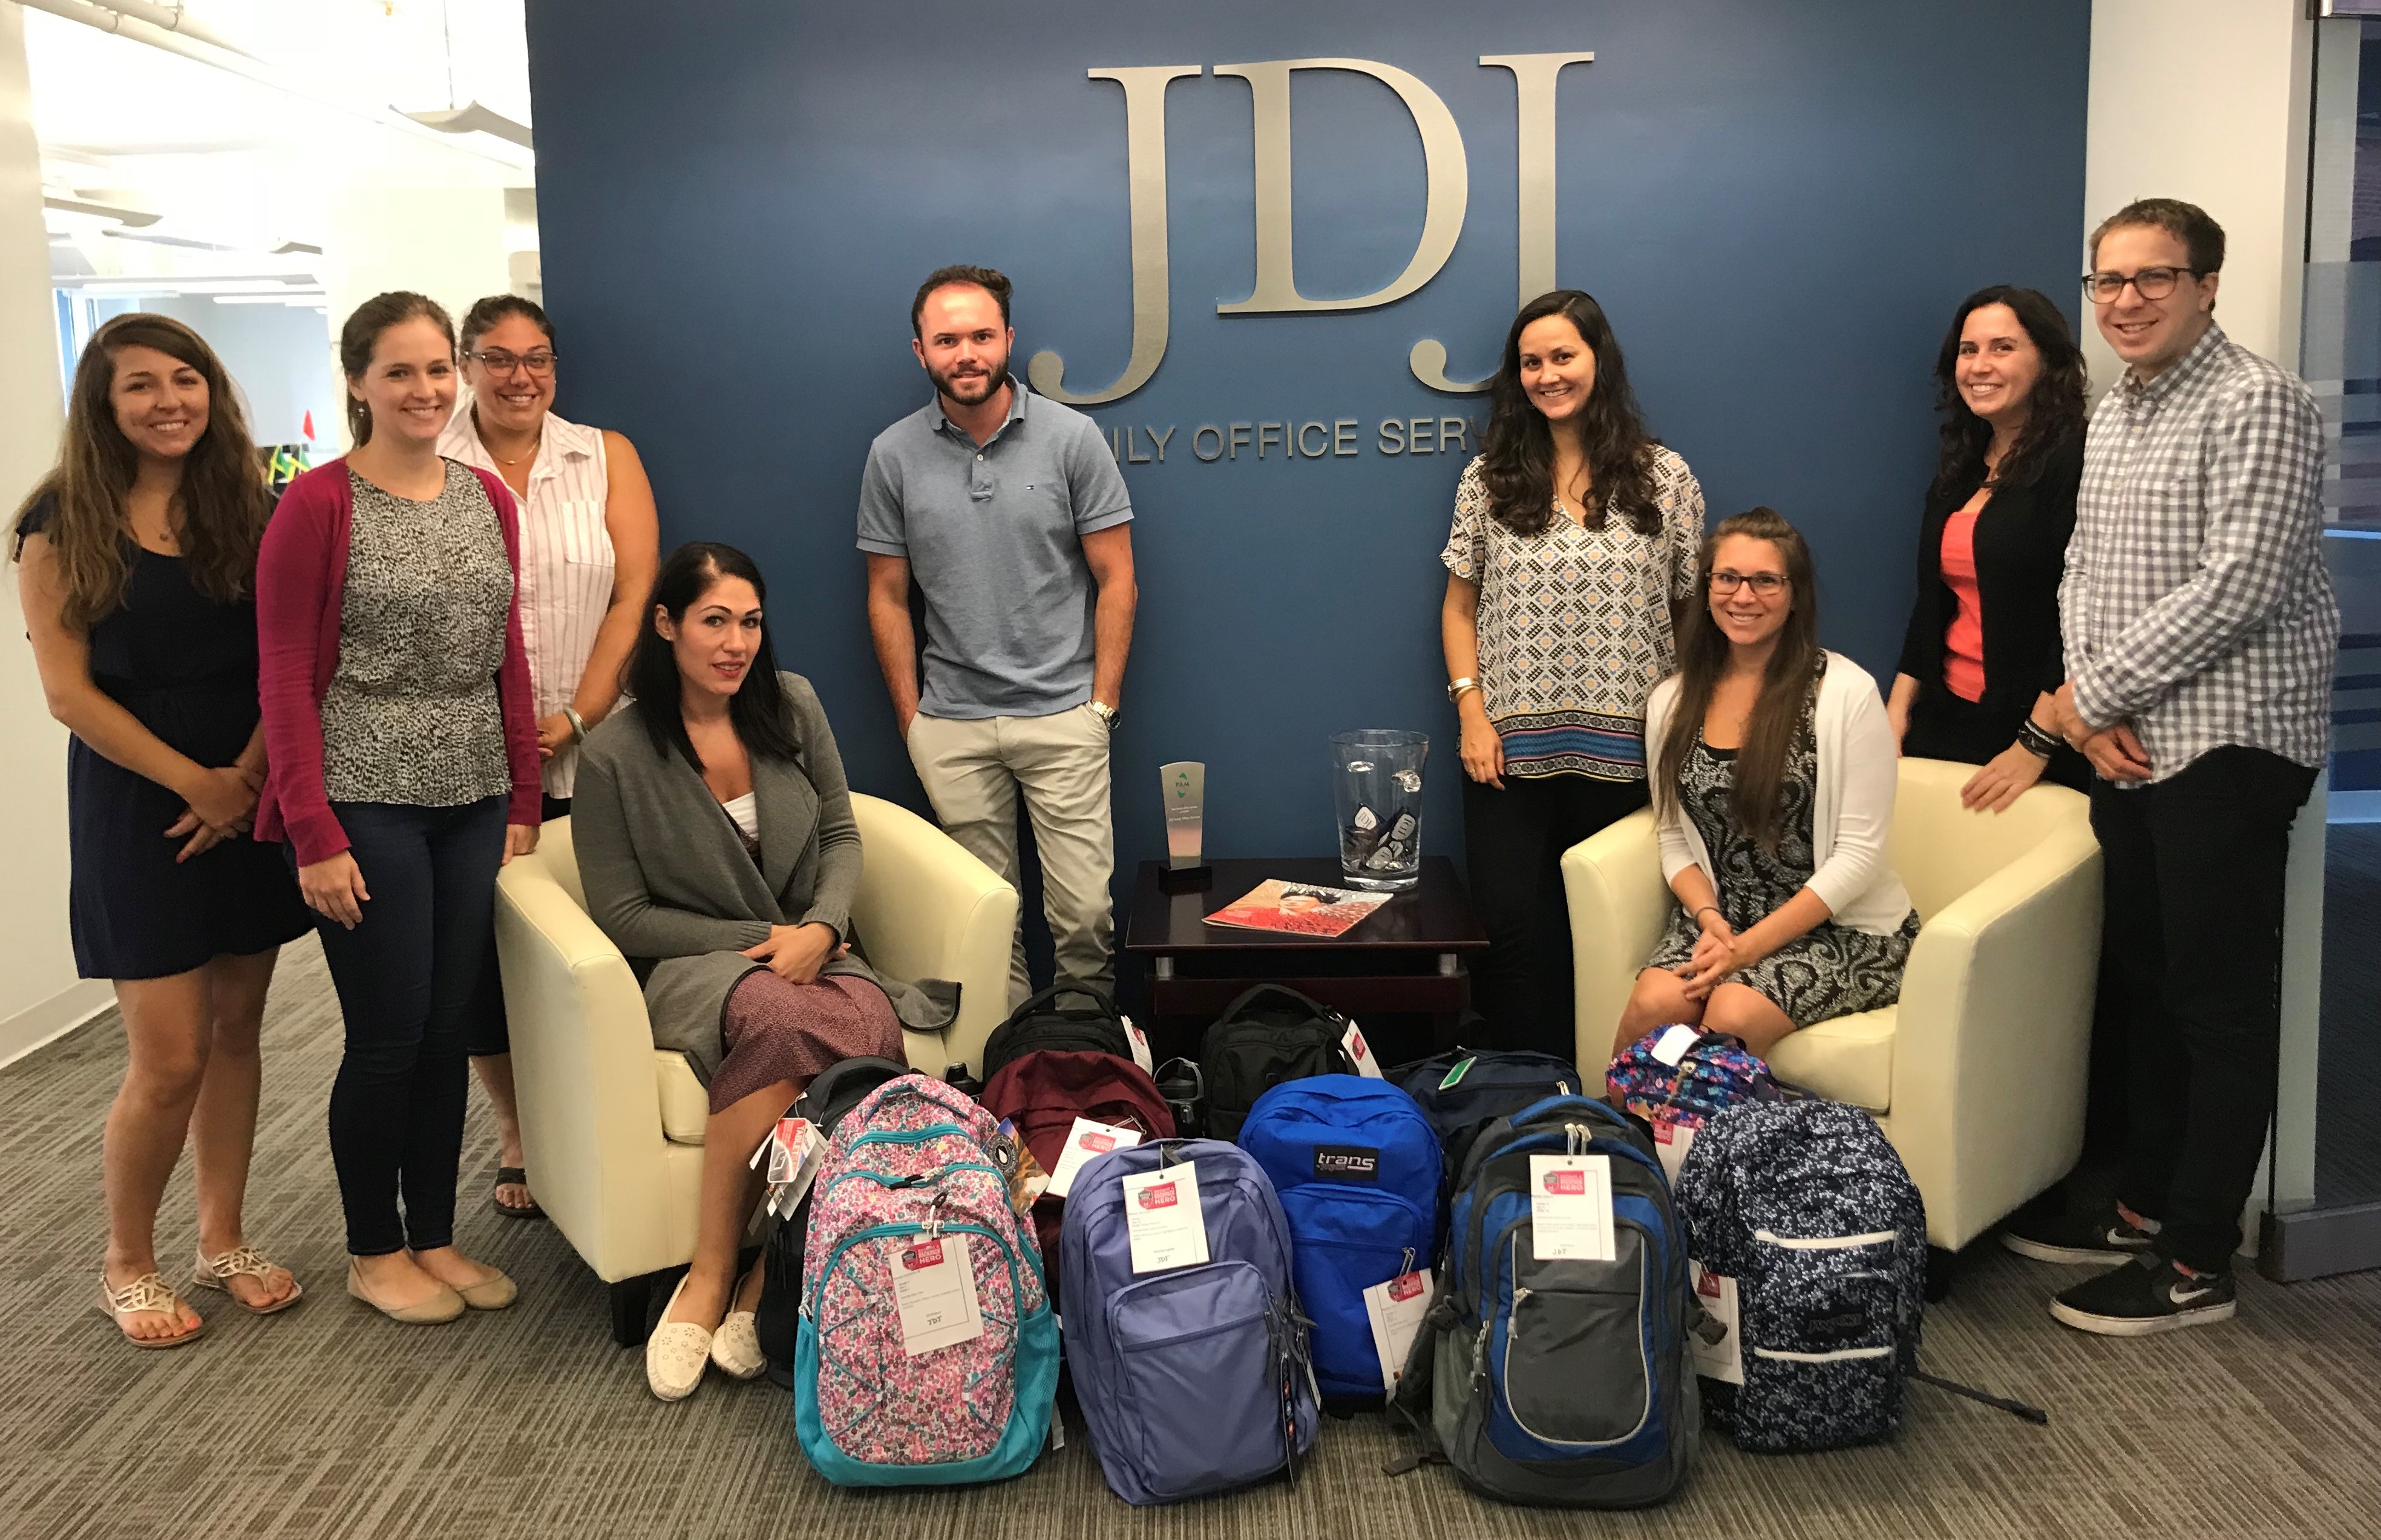 Pictured above, a few of this year’s JDJ Backpack Heroes with backpacks full of supplies, (from left): Gina Perrotta, Elizabeth Fogarty, Elana Vasi, Rachel DeIeso, Christian Flavin, Mallory Garneau, Angela Simmons, Vicki Saris, Stafford Turnage. Additional heroes are not pictured.